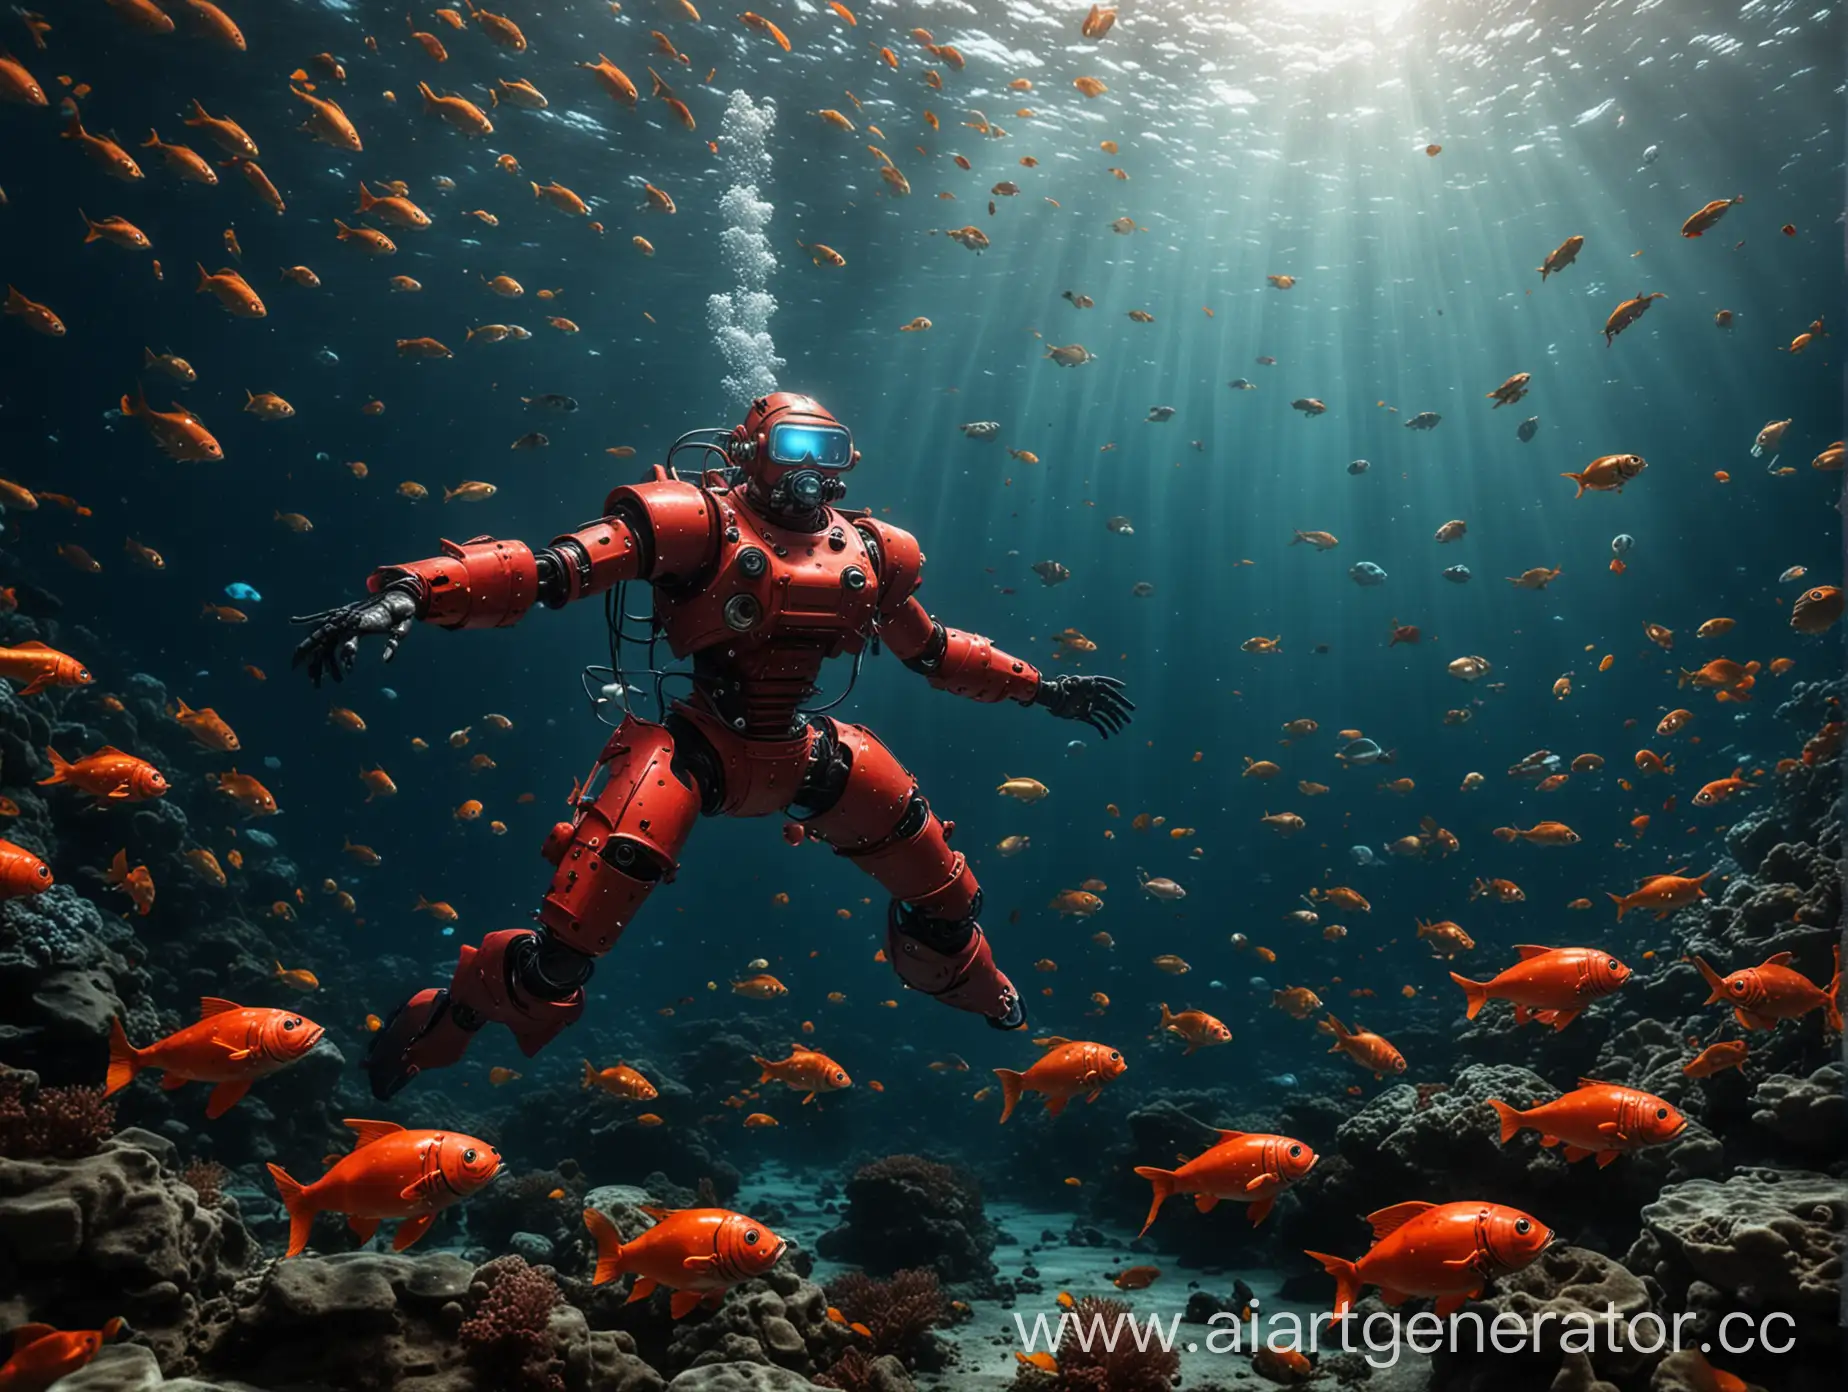 Red-Robot-Diver-Swimming-Among-Bright-Fish-in-the-Ocean-Depths